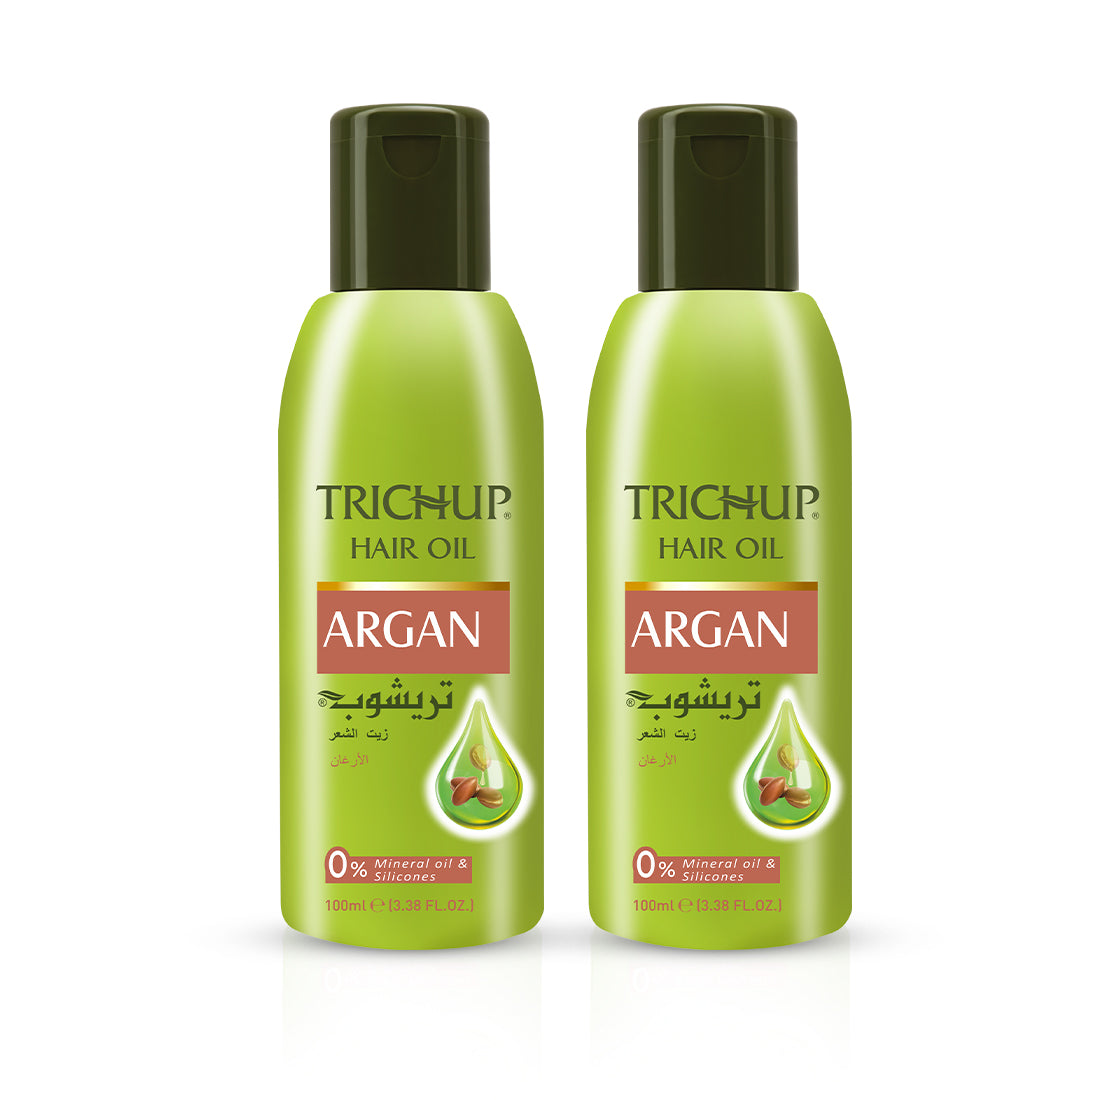 Trichup Argan Hair Oil For Frizziness - Enriched with Moroccan Argan, Coconut & Til Oil - Provides Vital Nutrients, Lubricates Hair Shaft & Helps Retain Moisture - 100ml (Pack of 2)